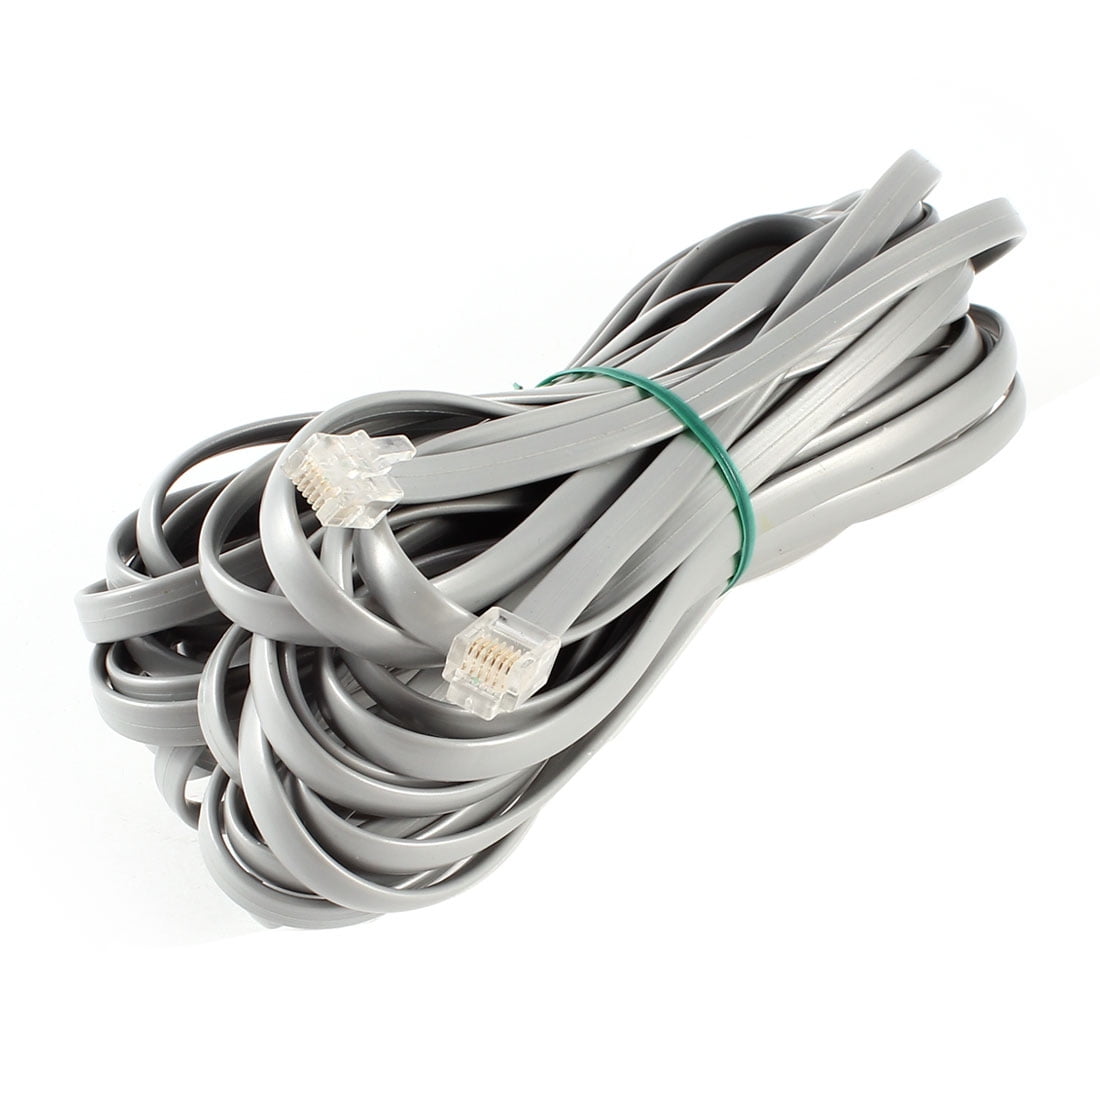 White 6Ft RJ12 6P6C Straight Through Data Cable Cord Wire for POS,Cash Drawer 